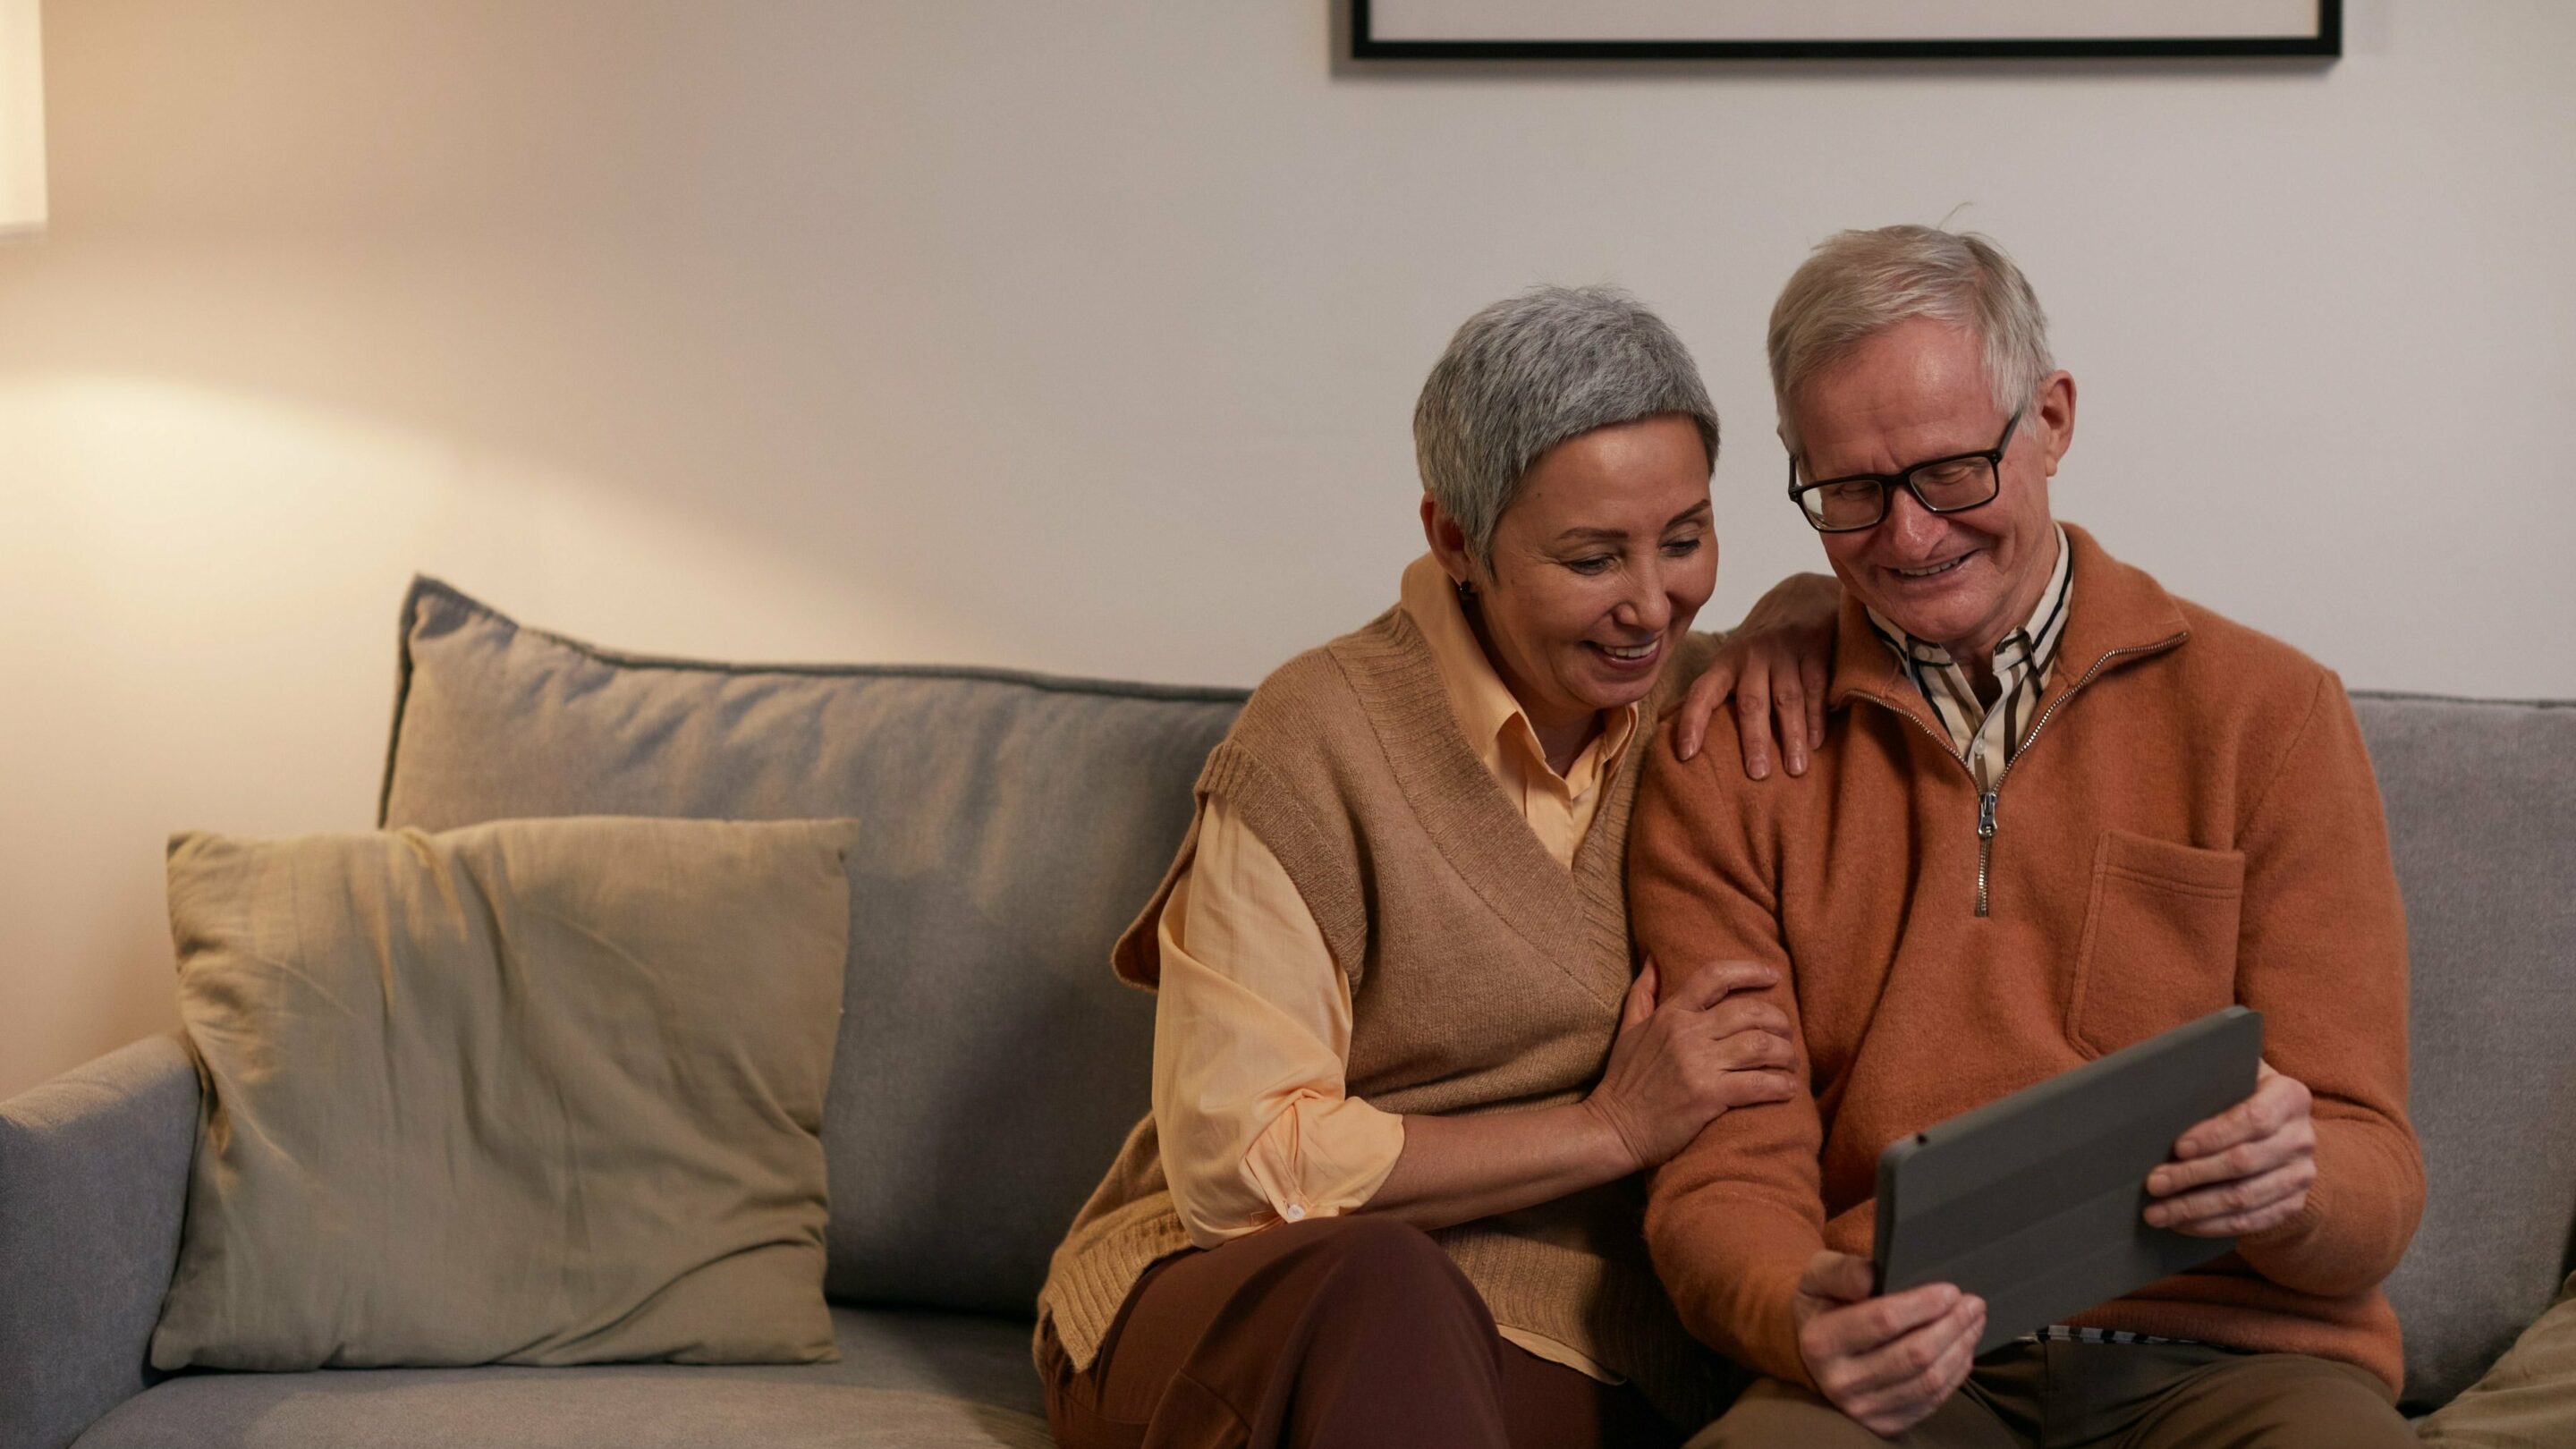 A happy older couple sat on a sofa together looking at an iPad.